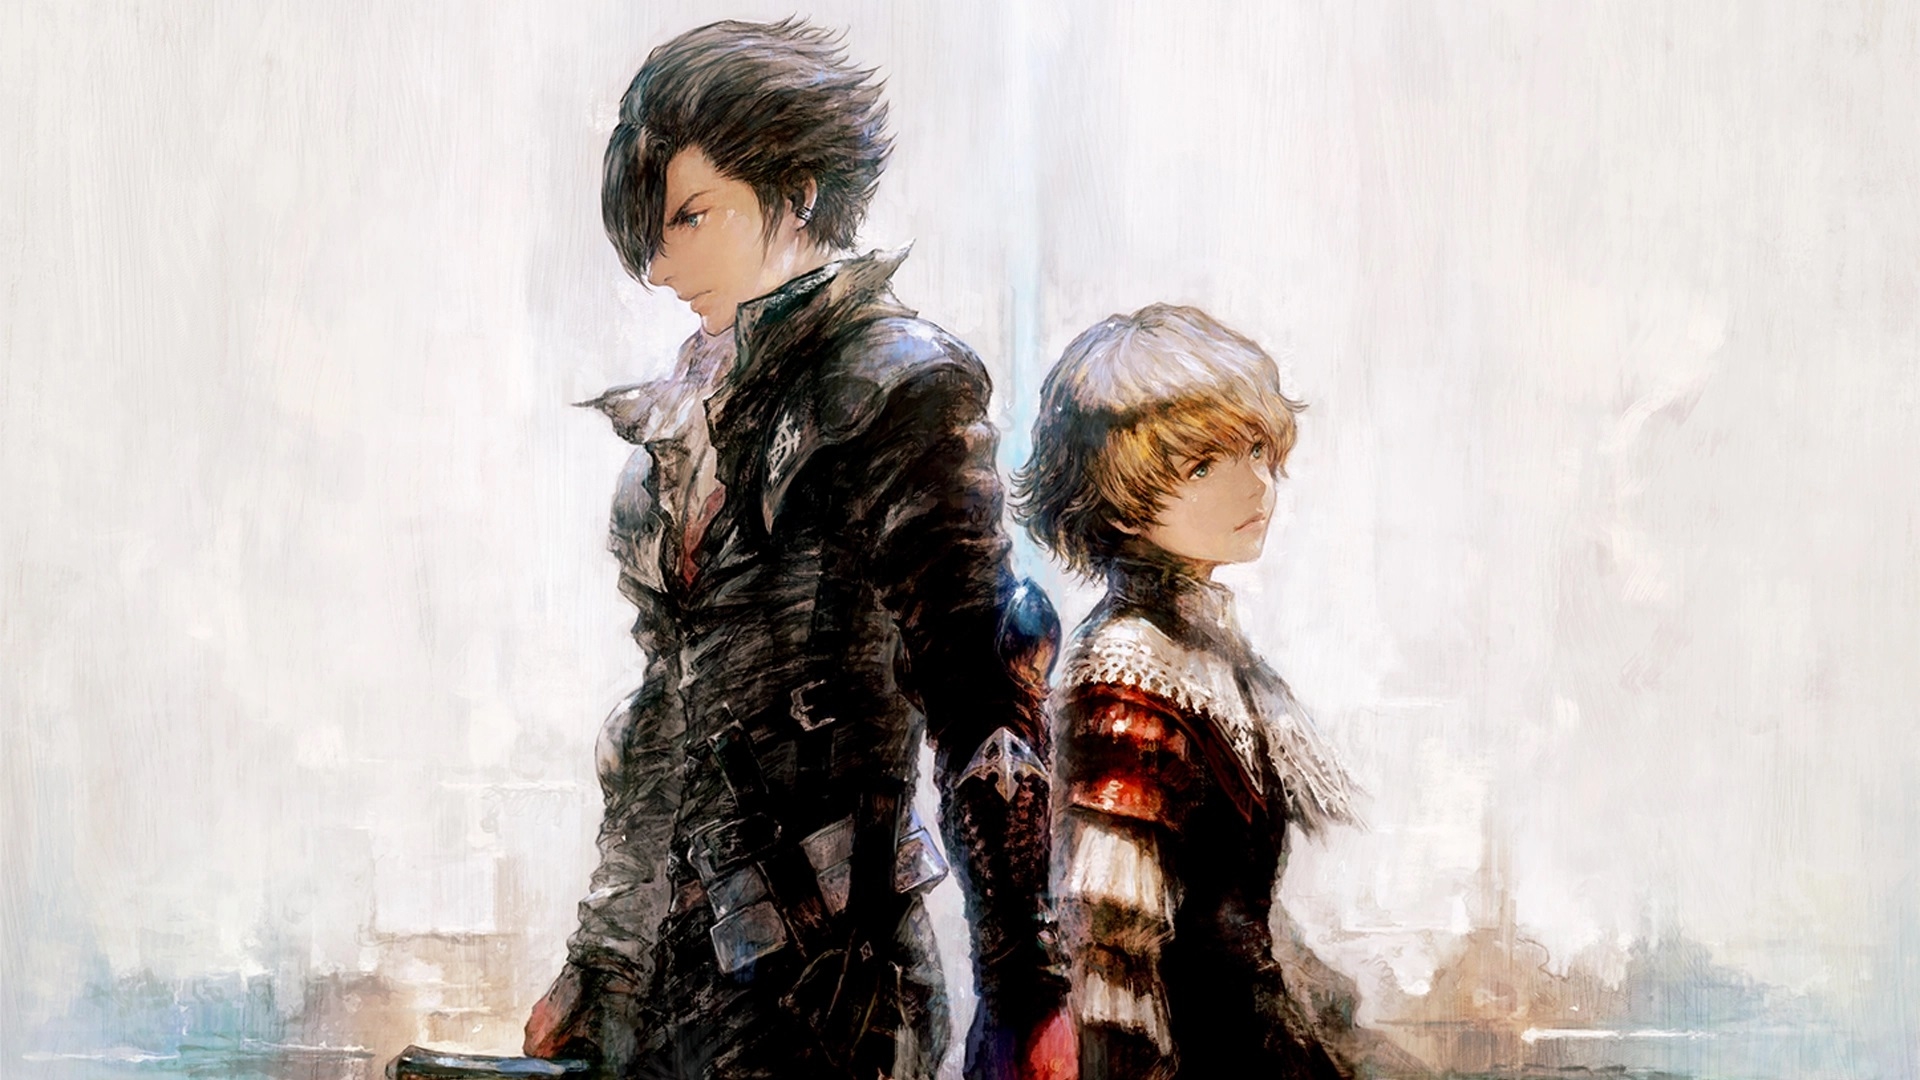 Key art of Clive Rosfield (left) and Joshua Rosfield (right), standing back to back